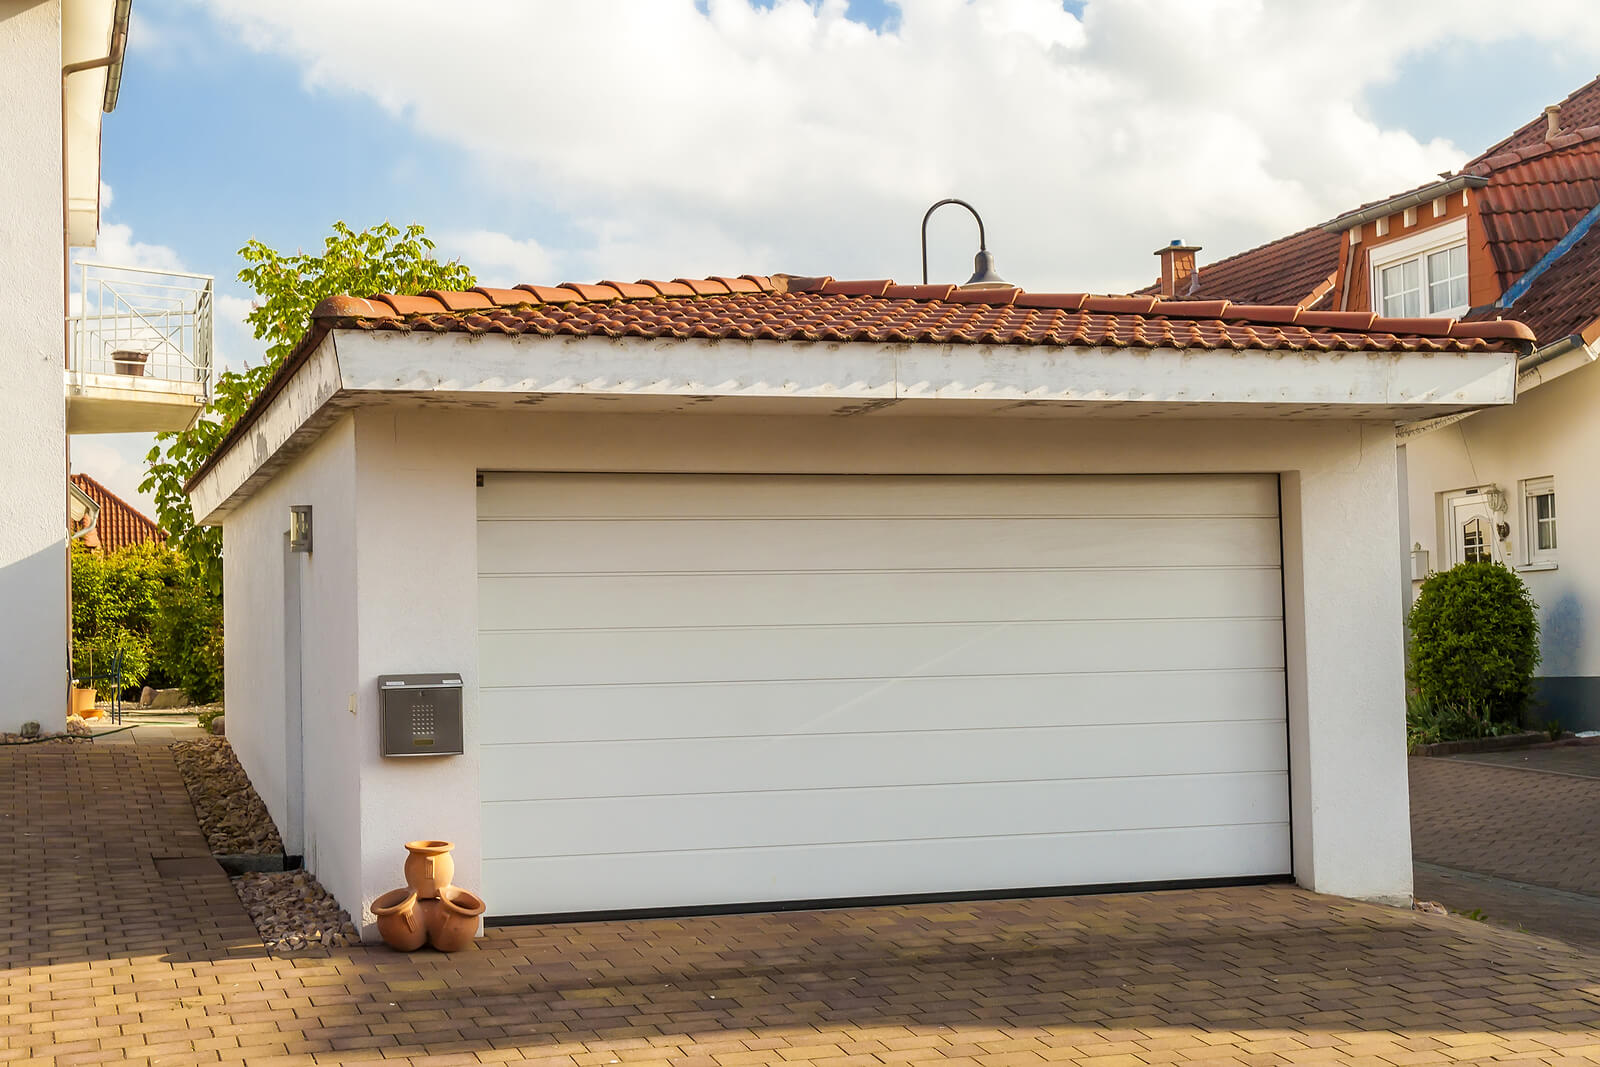 Detached-White-Garage-With-Tile-Roof